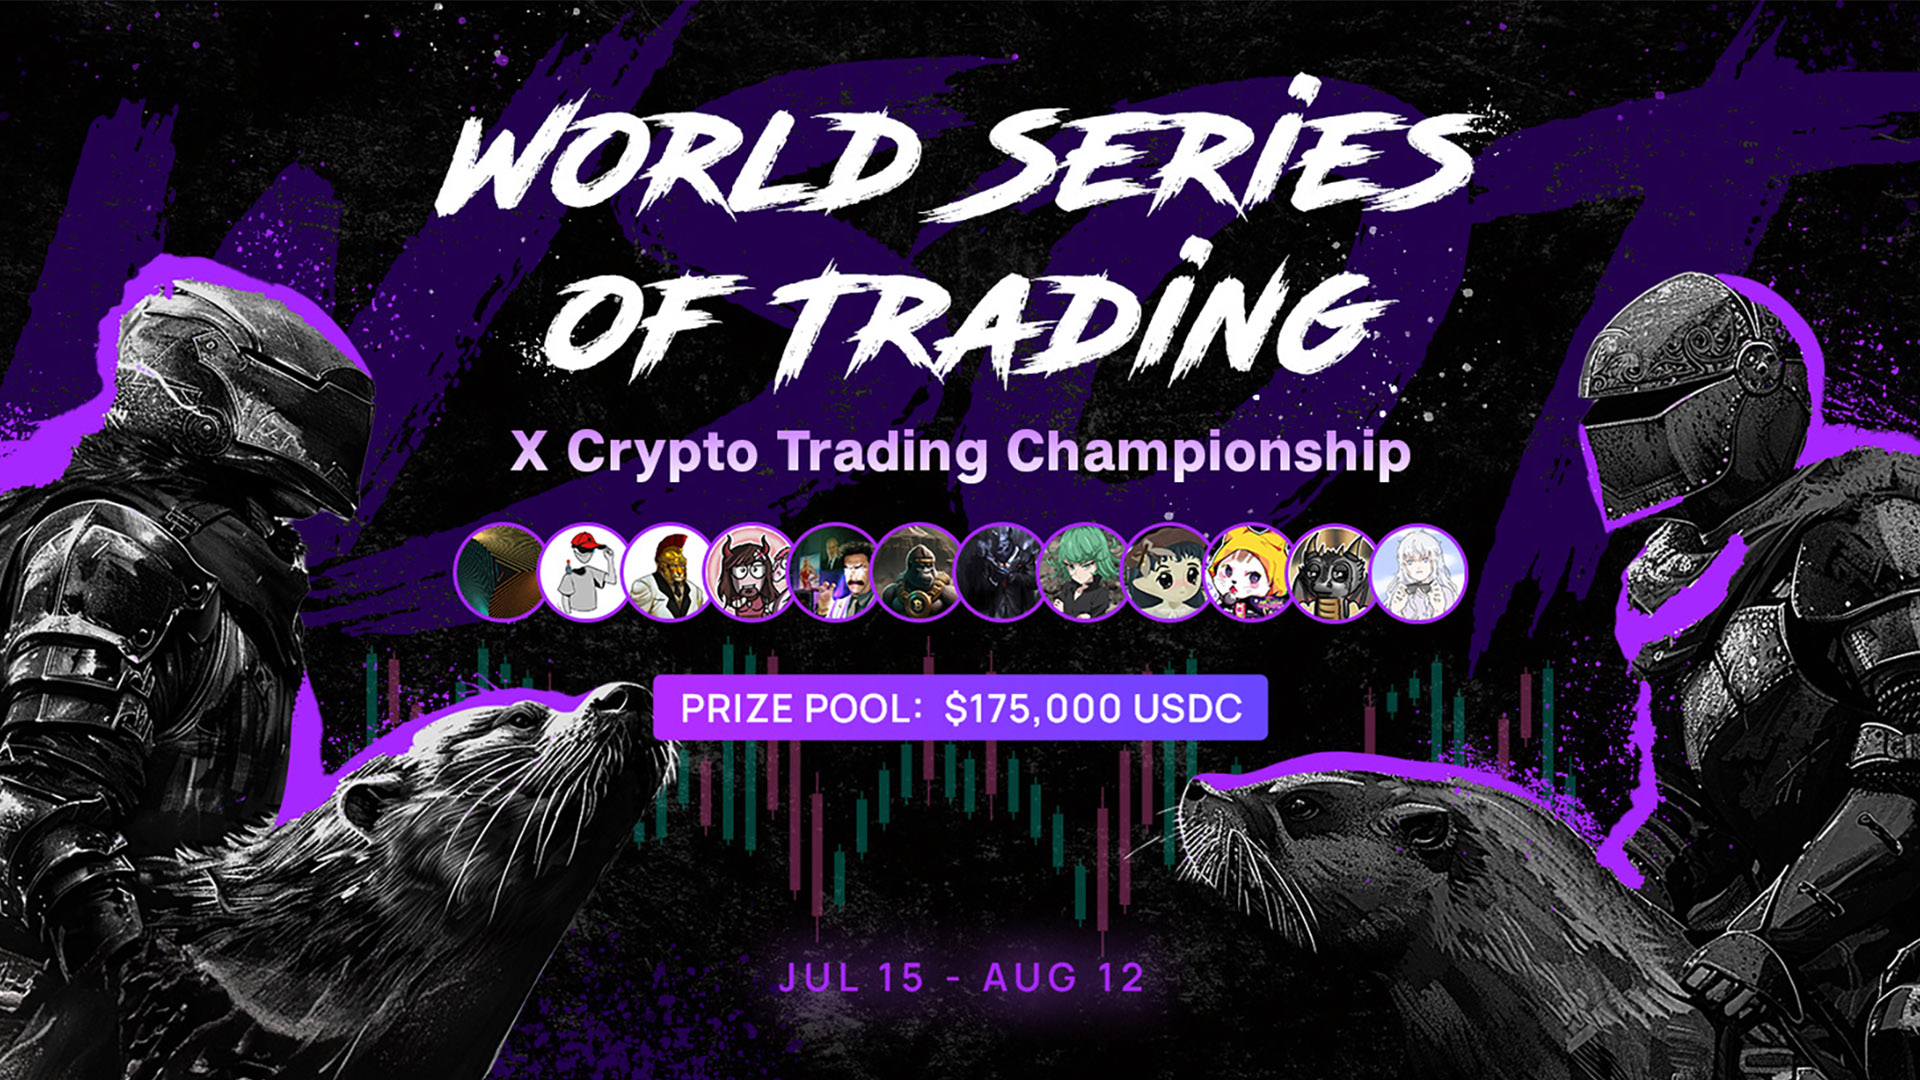 World Series of Trading presented by Orderly Network introduces X Crypto Trading Championship